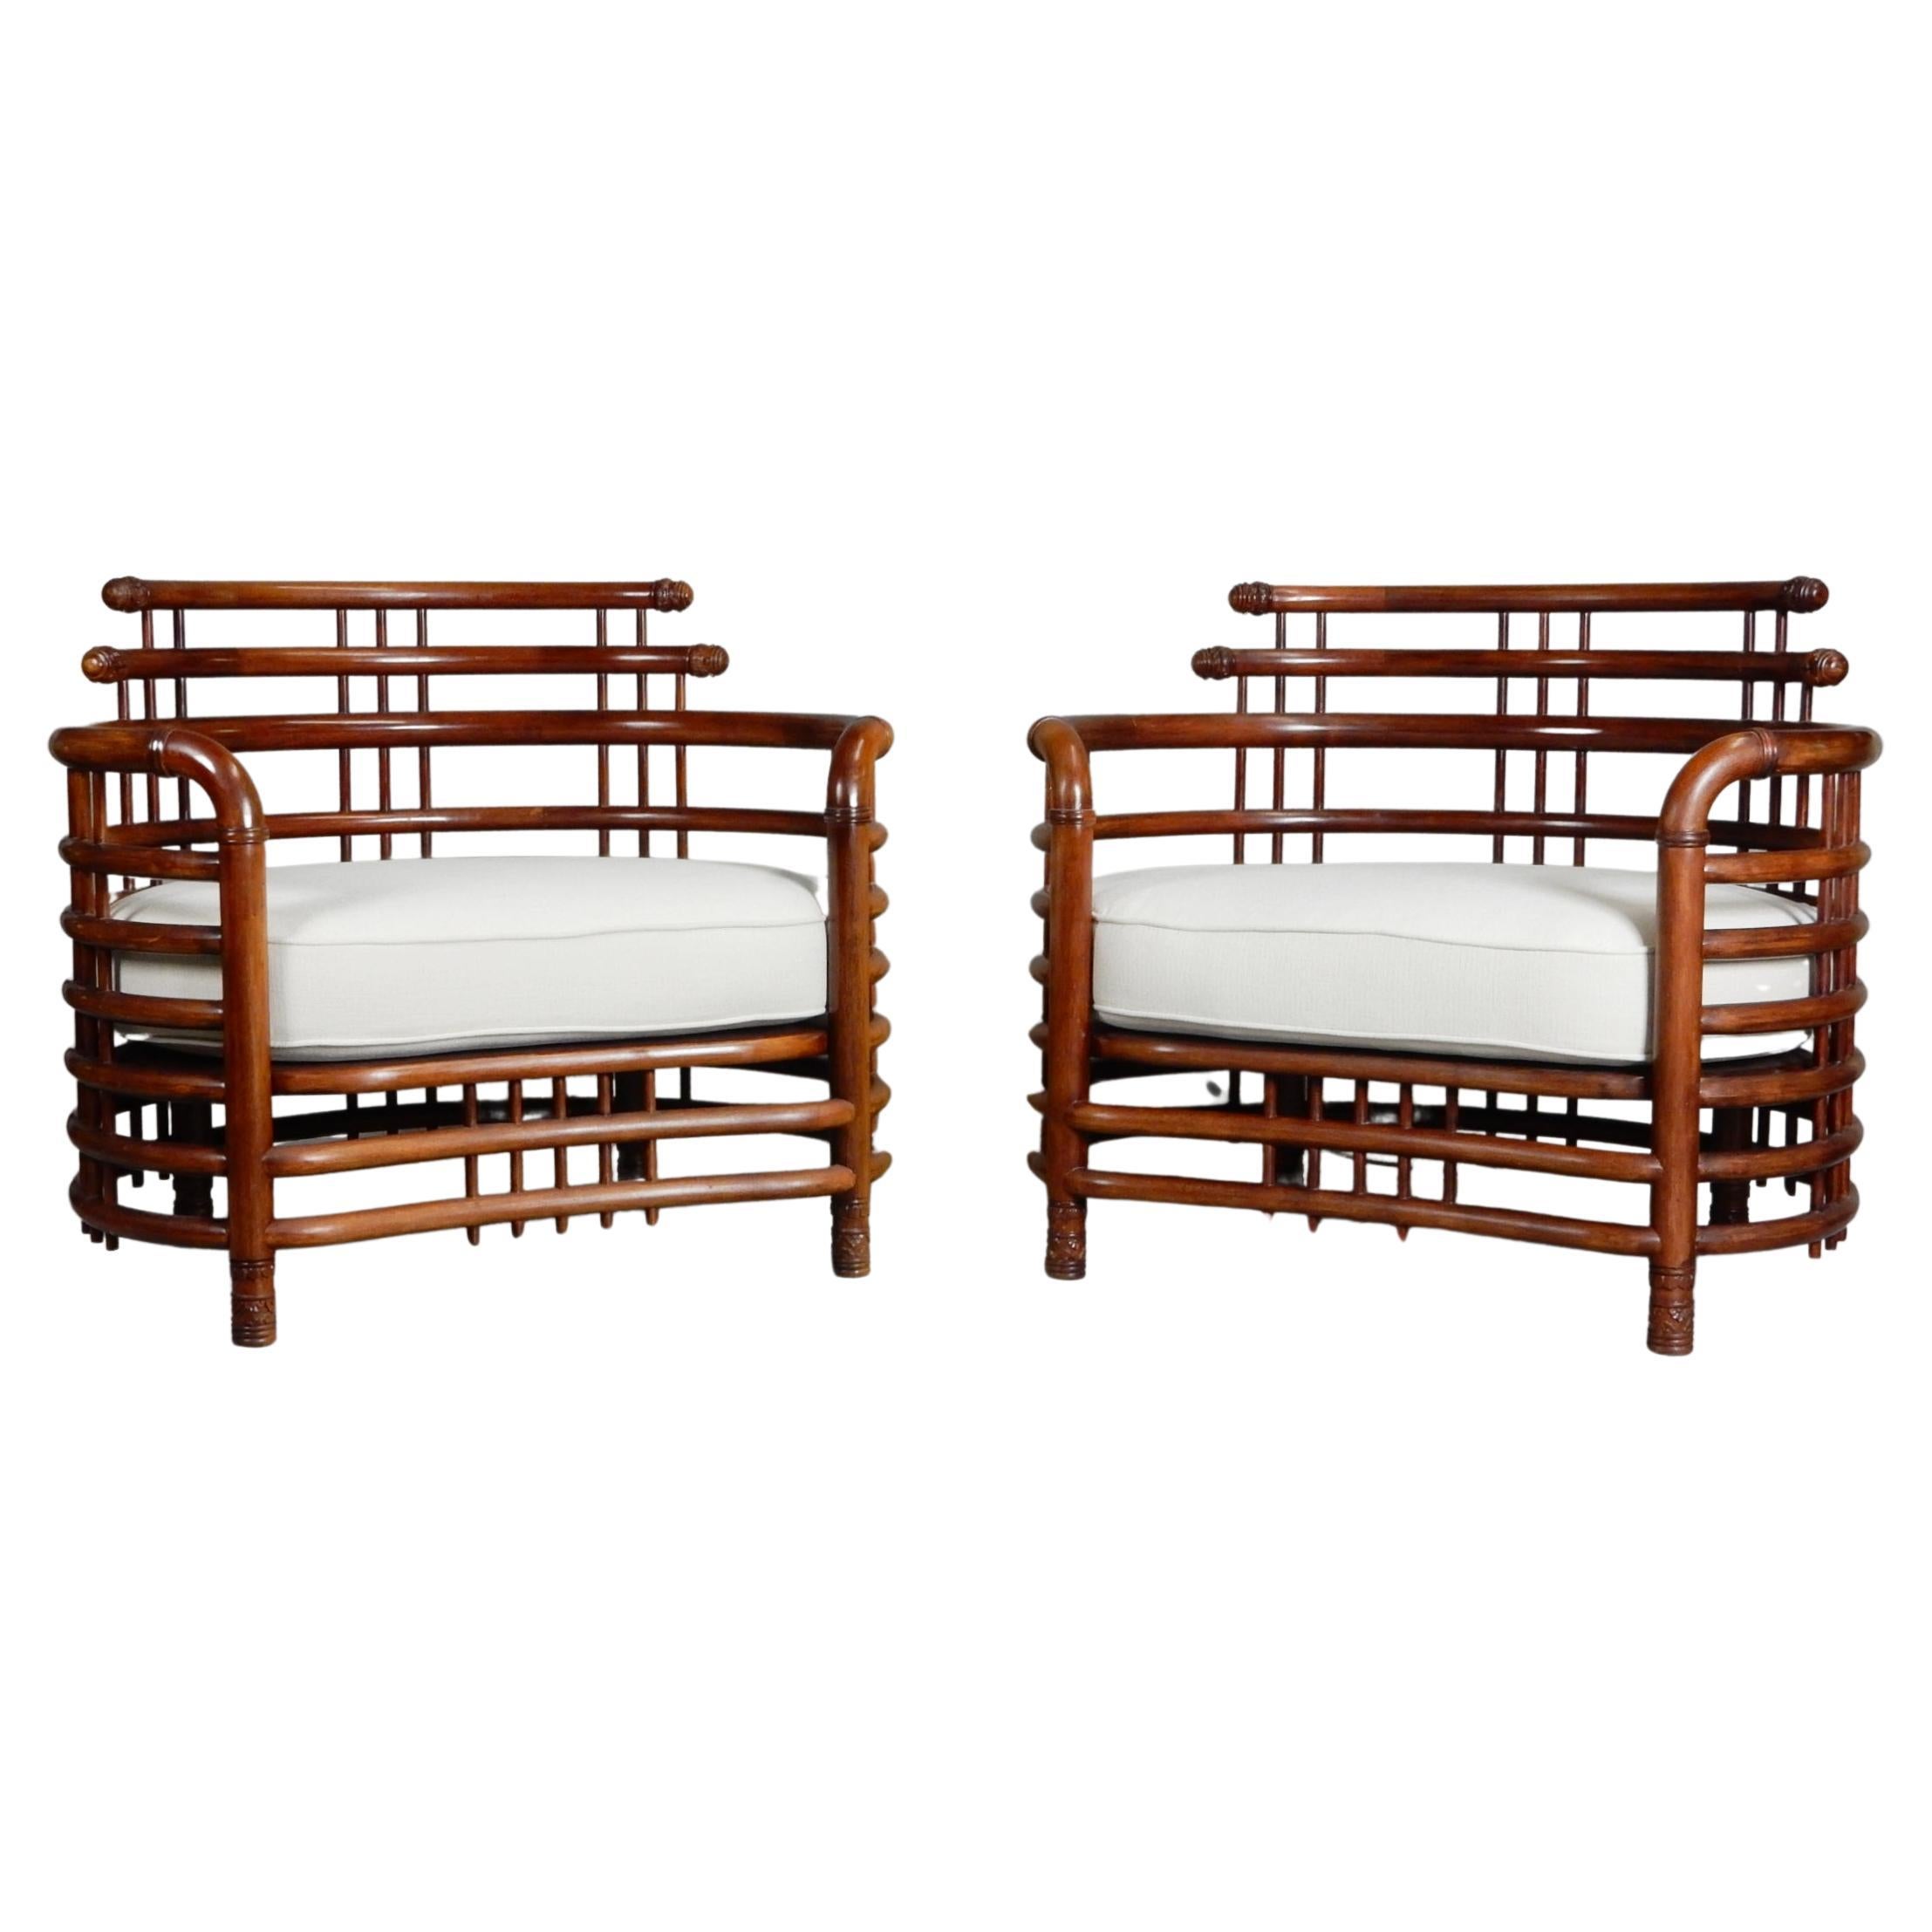 1950's, Sculpted Bentwood Teak Birdcage Lounge Chairs